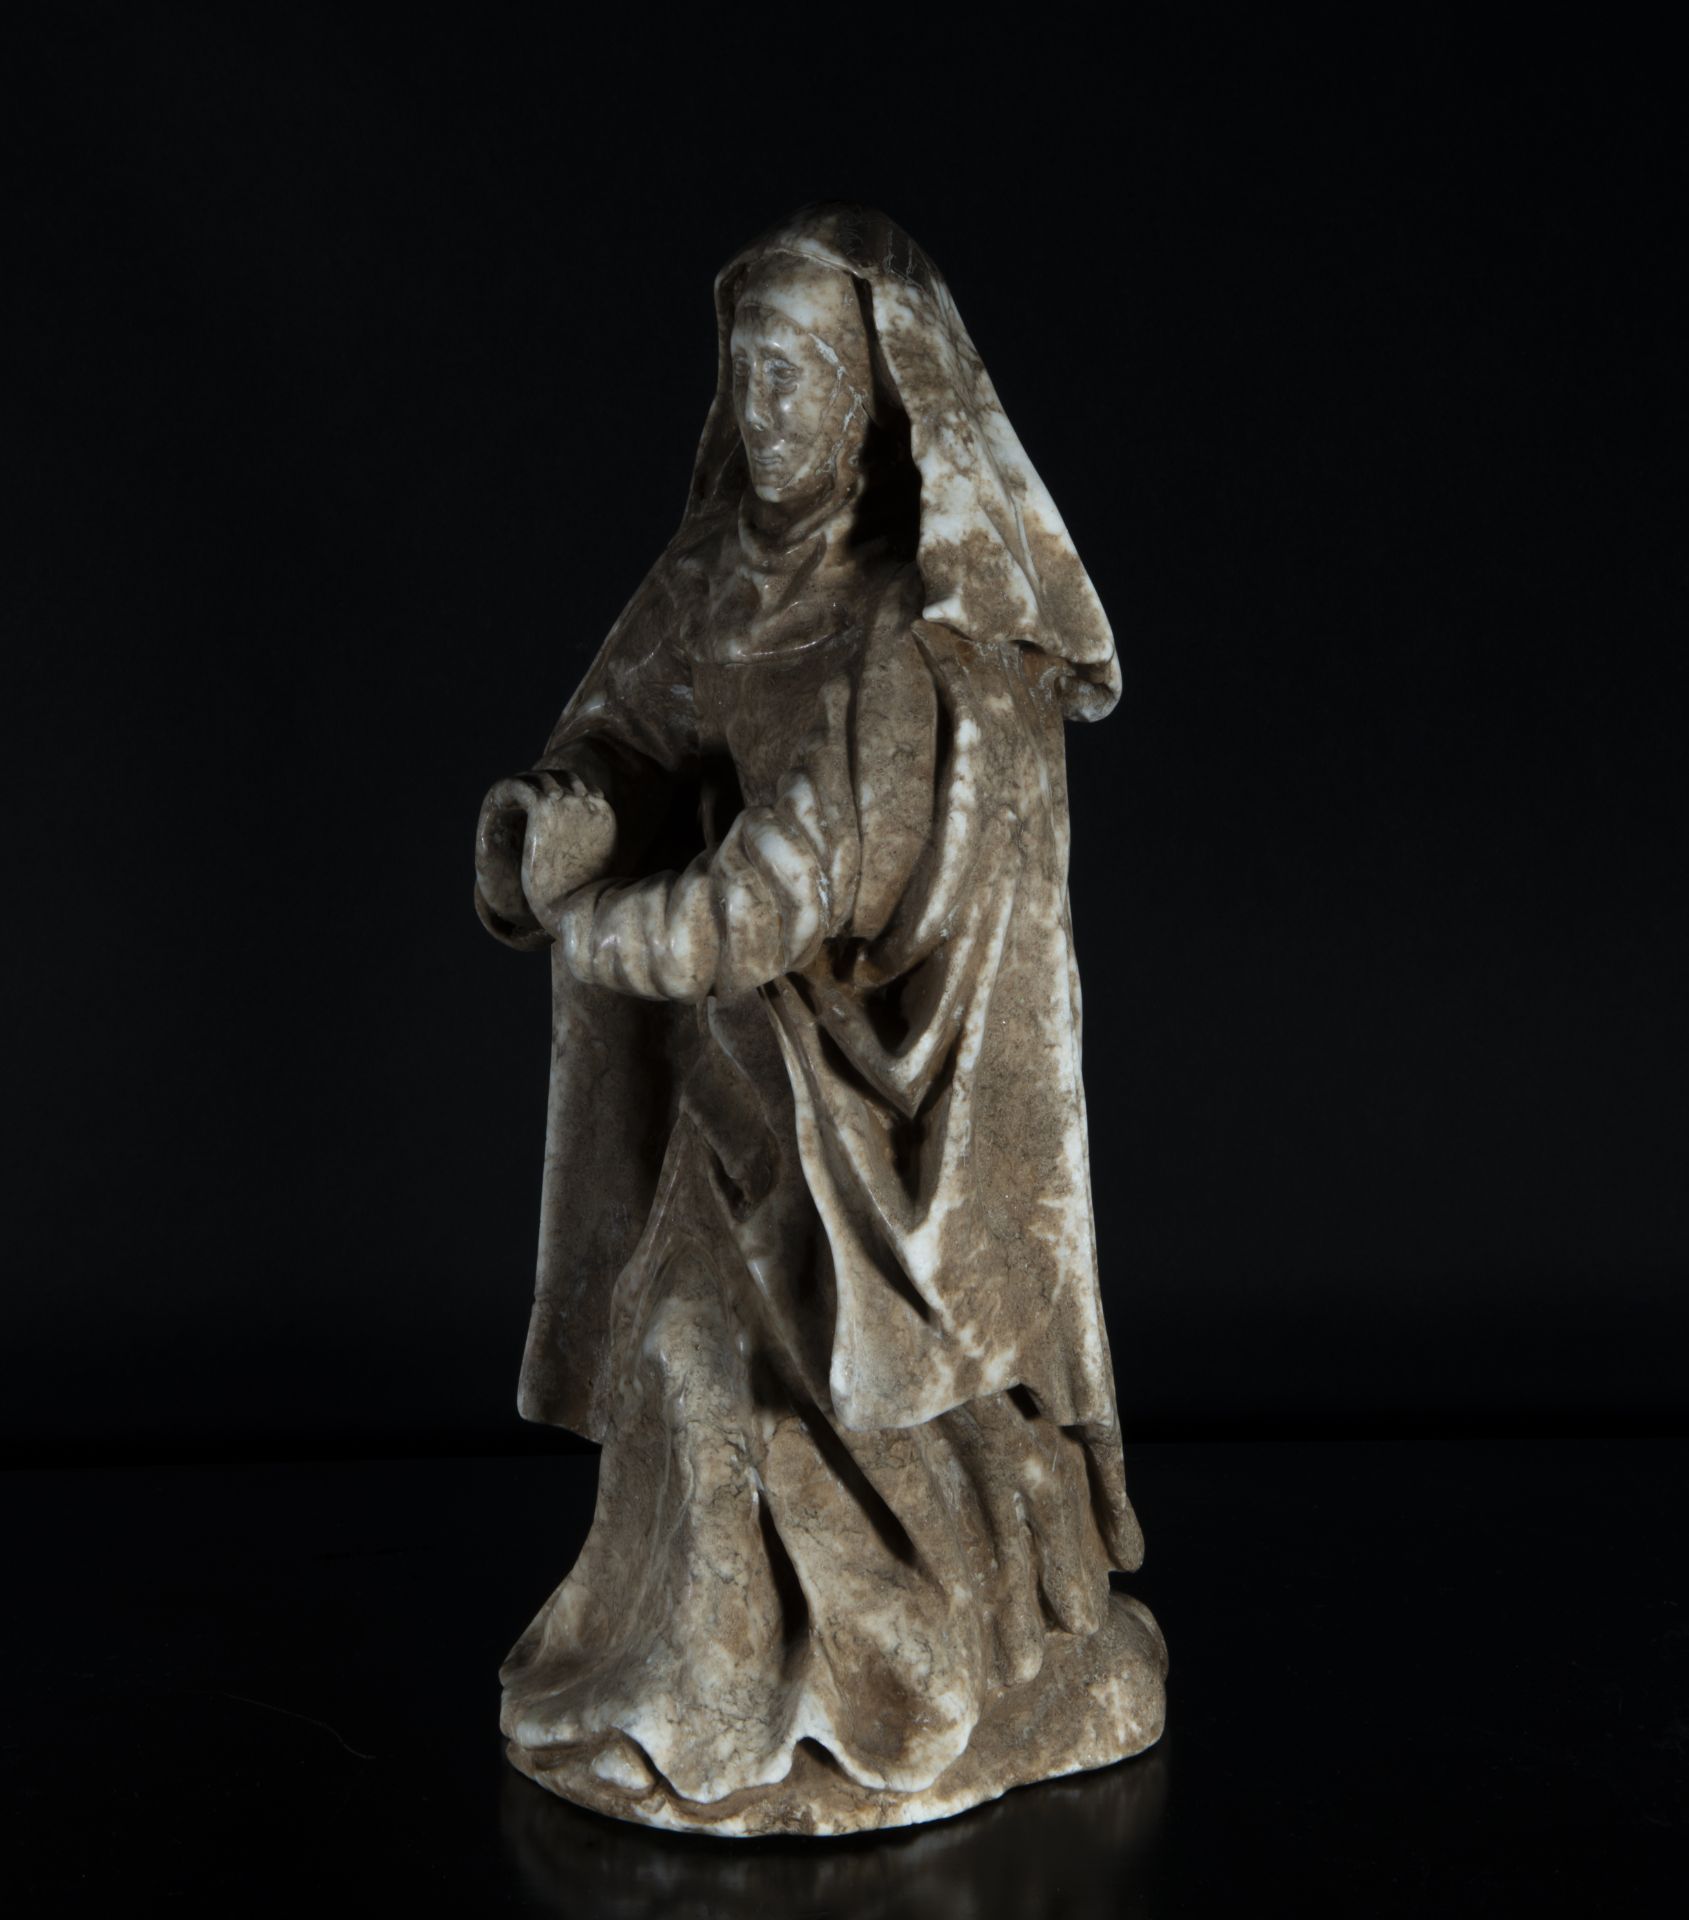 Portuguese Virgin in Alabaster carving, possibly 17th century, Portuguese work - Image 2 of 4